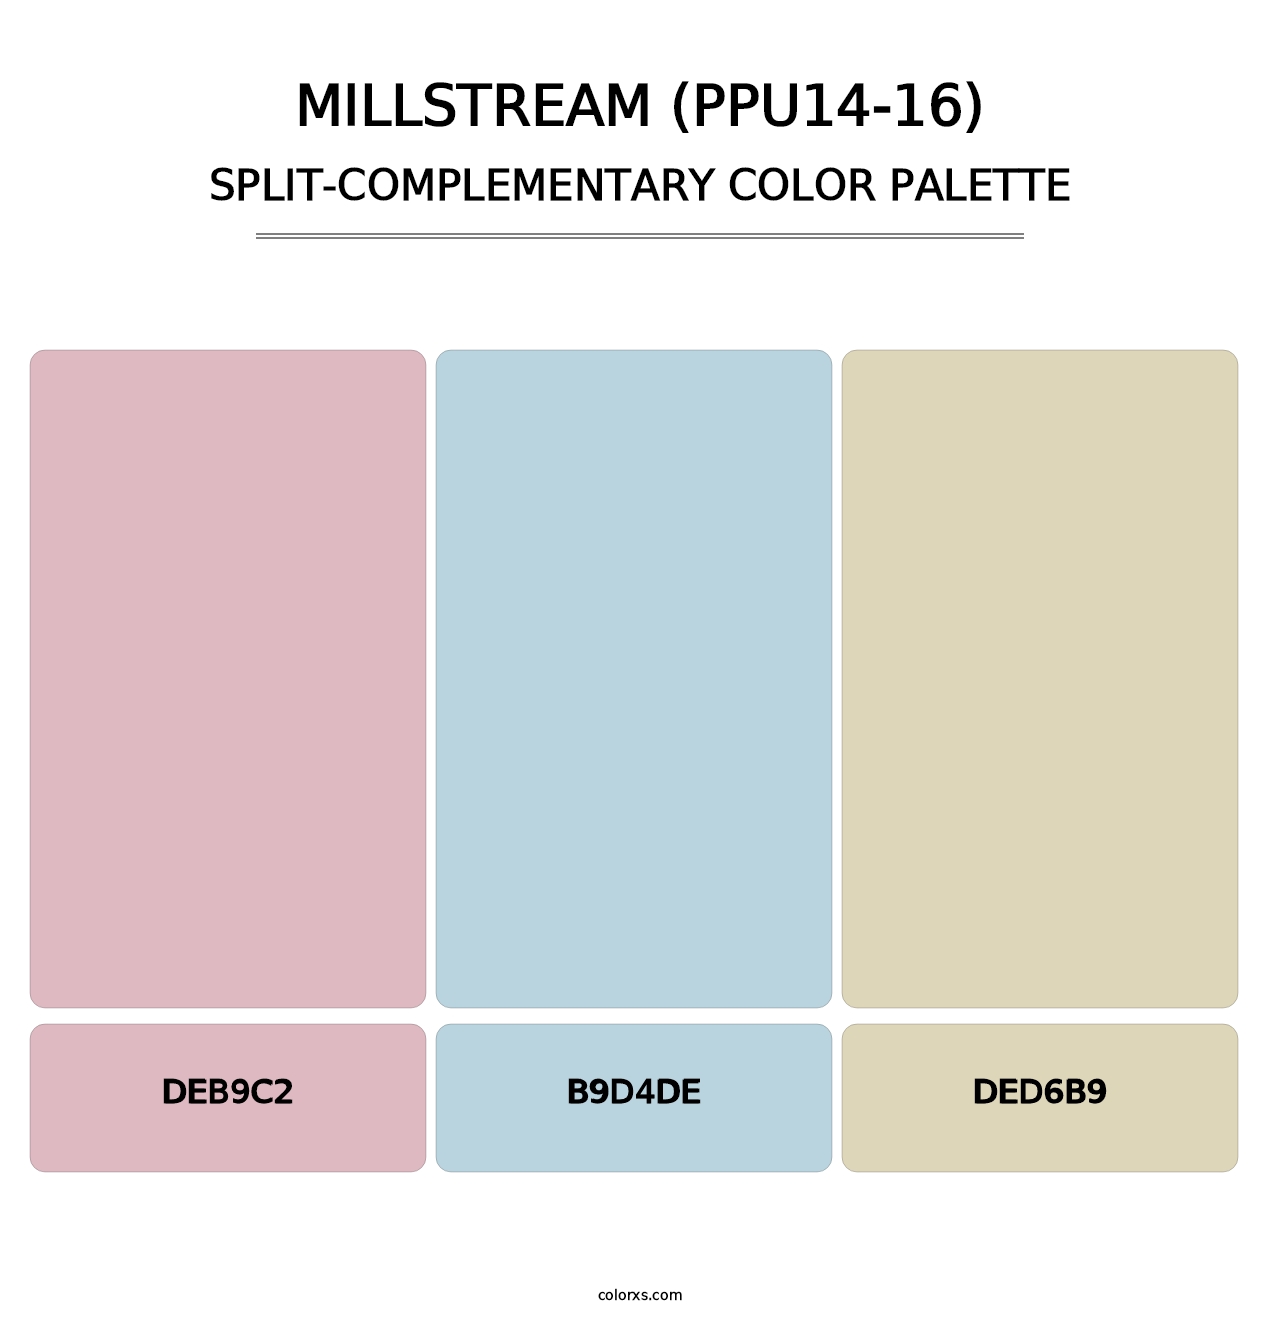 Millstream (PPU14-16) - Split-Complementary Color Palette